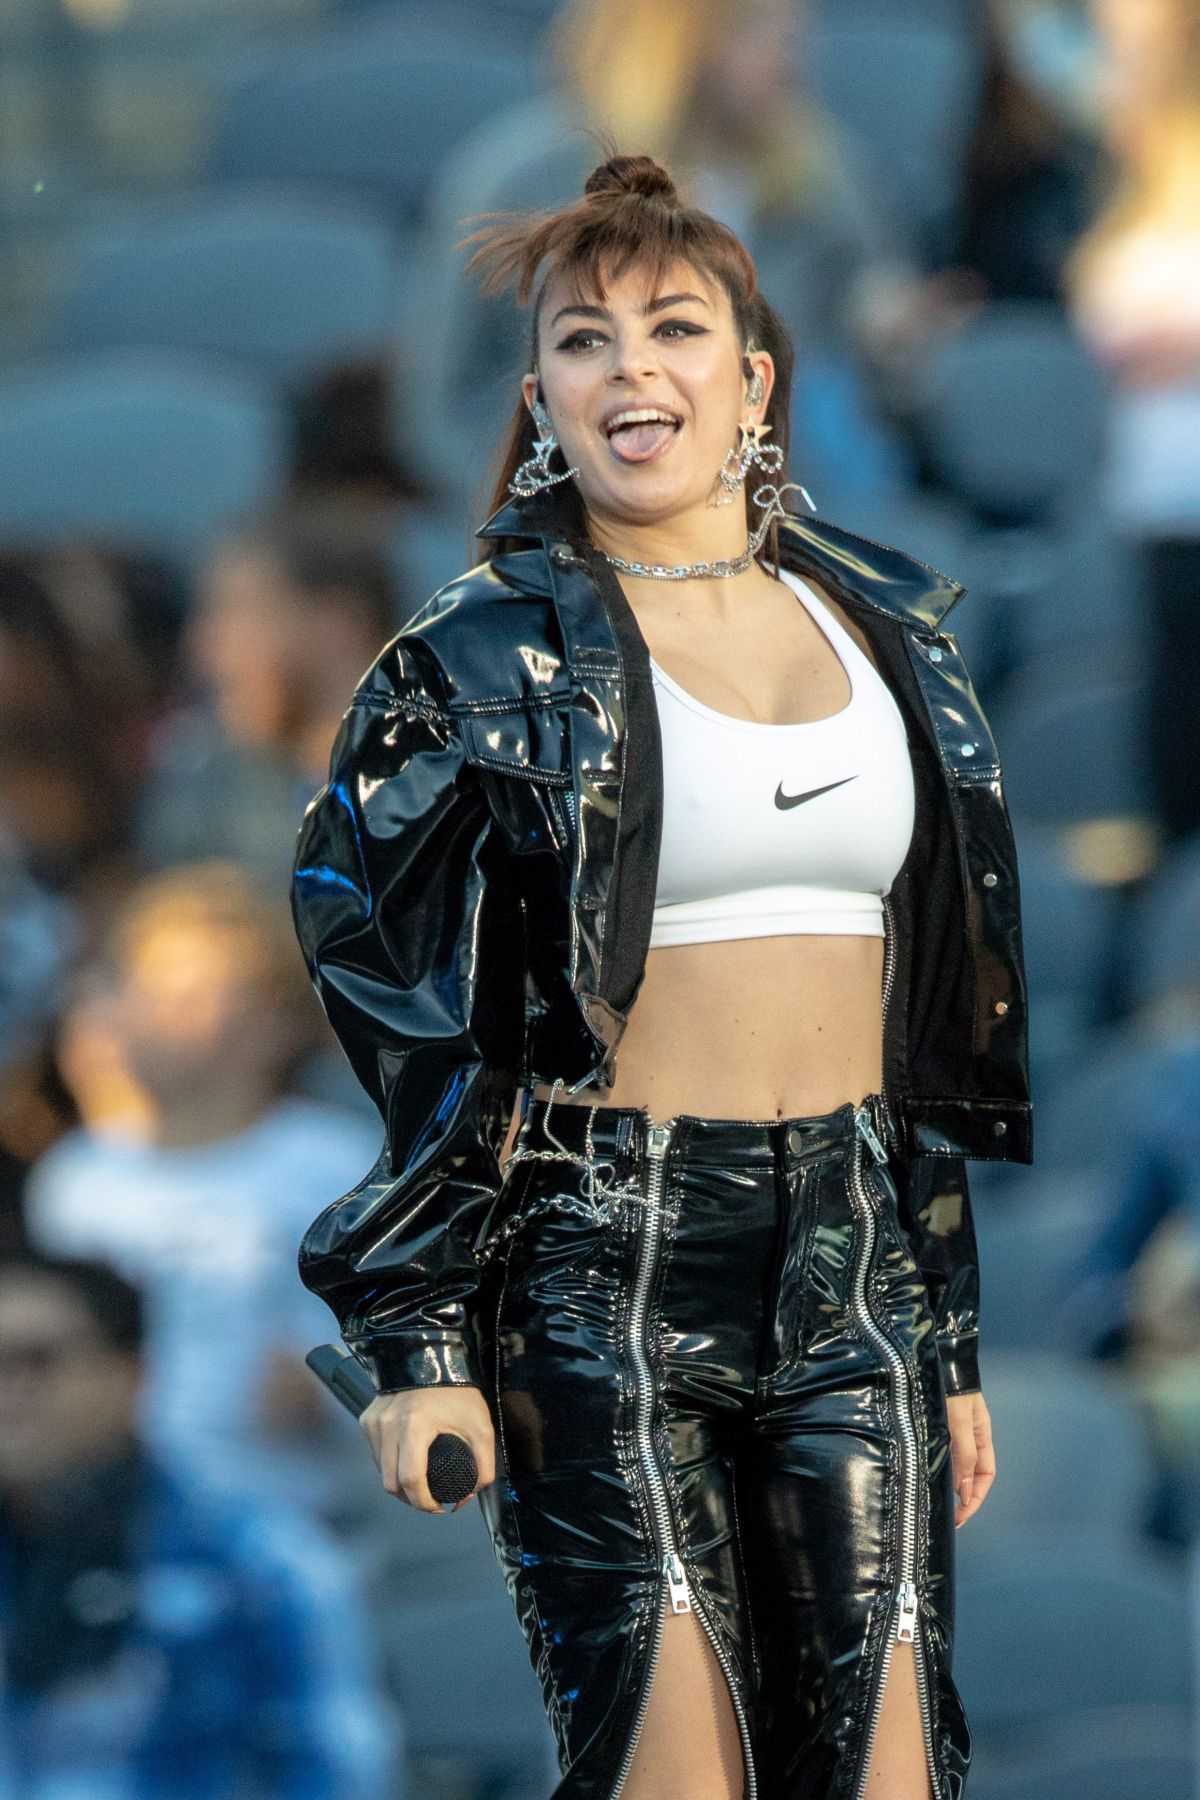 CHARLI XCX Performs at Reputation Tour at Soldier Field in Chicago 06/02/20...